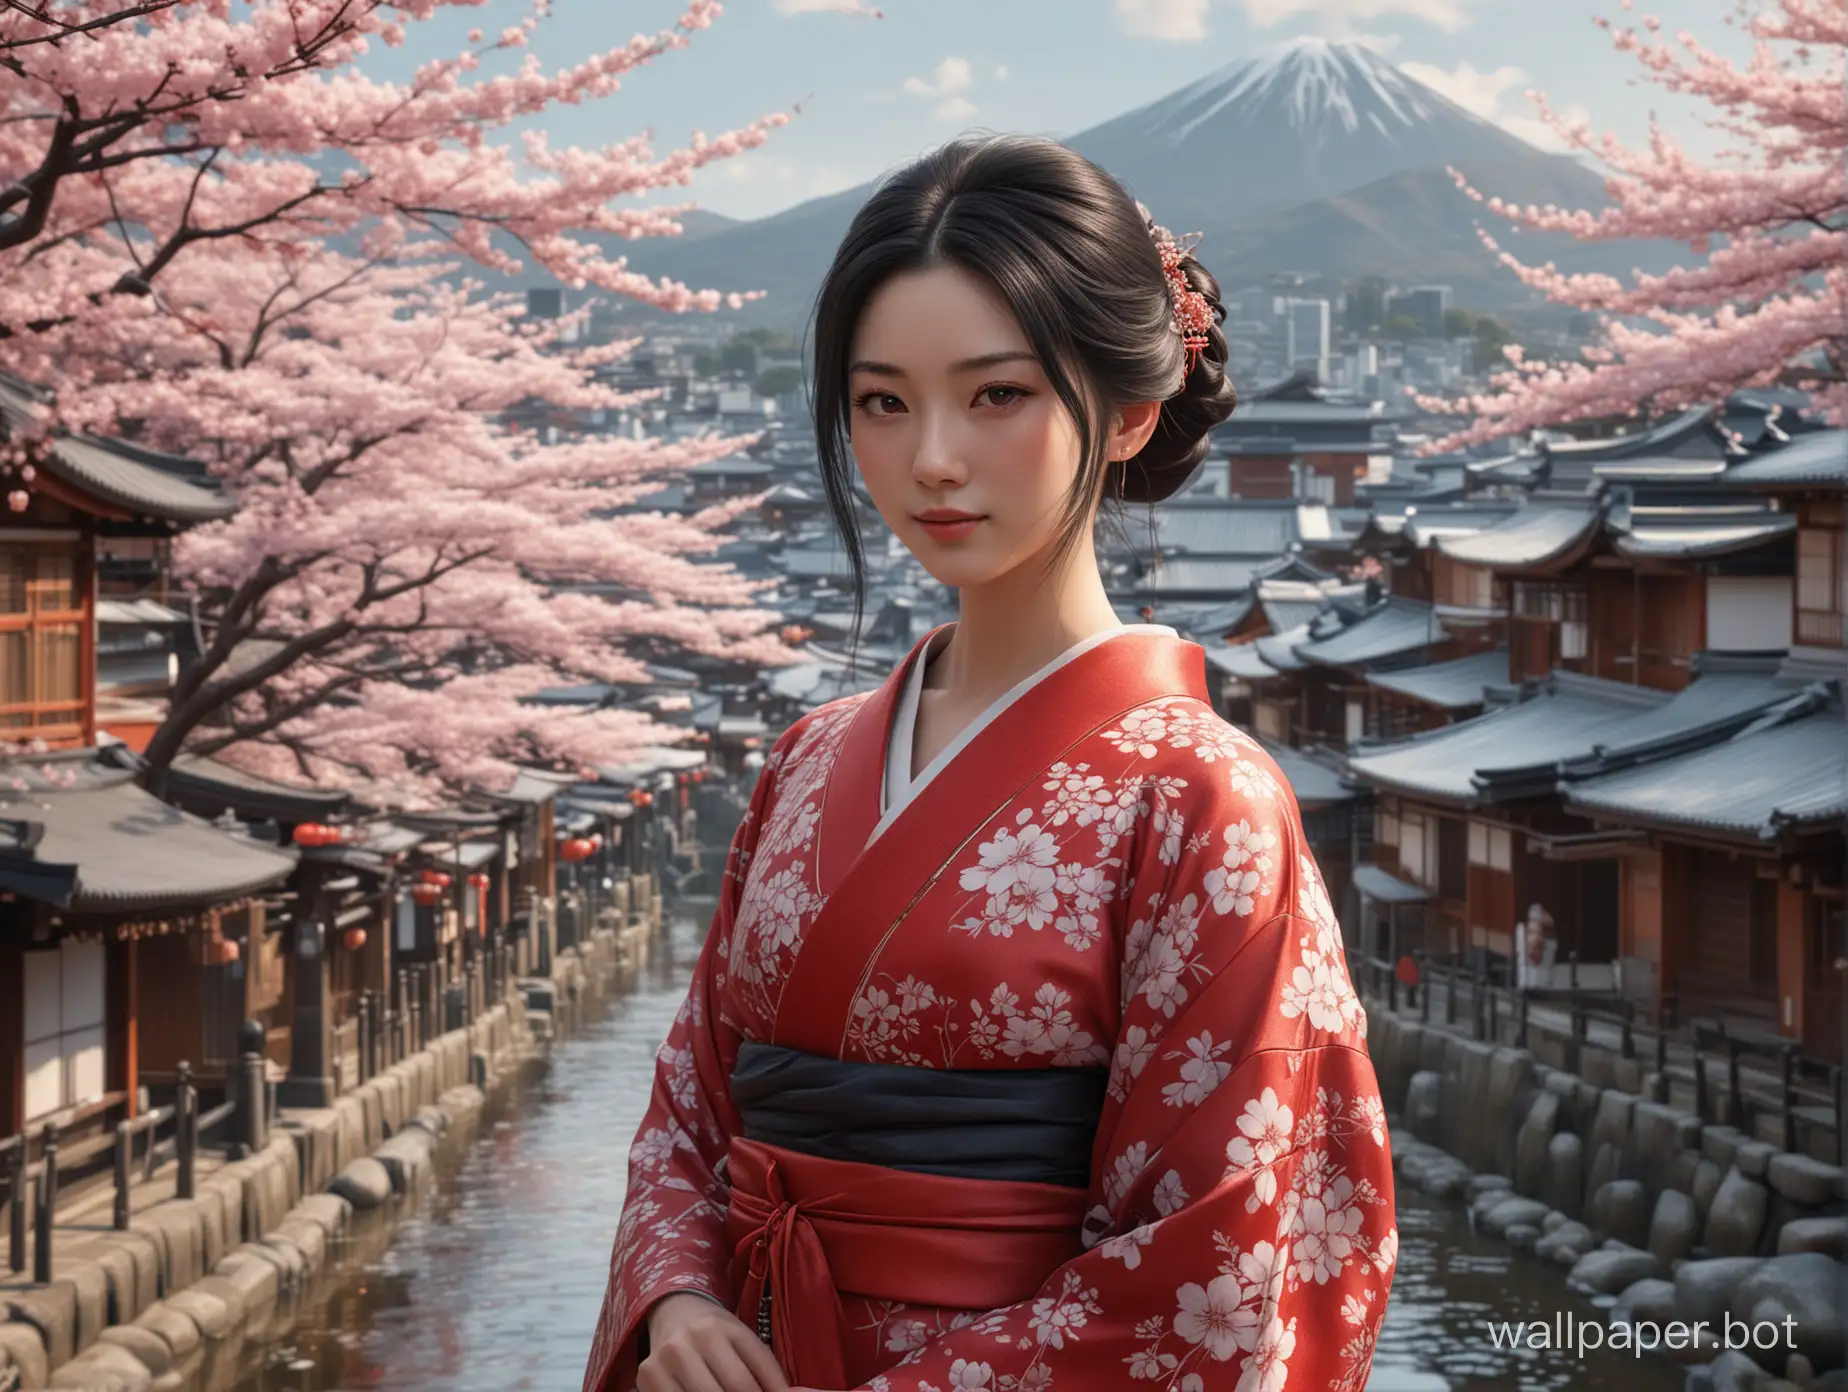 photorealism, porcelain skin, japan girl, graceful forms, kind eyes, perfect figure, slight smile. long black hair. fancy red short kimono. fancy hairpin. detailed city of Kyoto in background. full body standing pose. detailed hands. sakura petals effect. ultra realistic, 8k